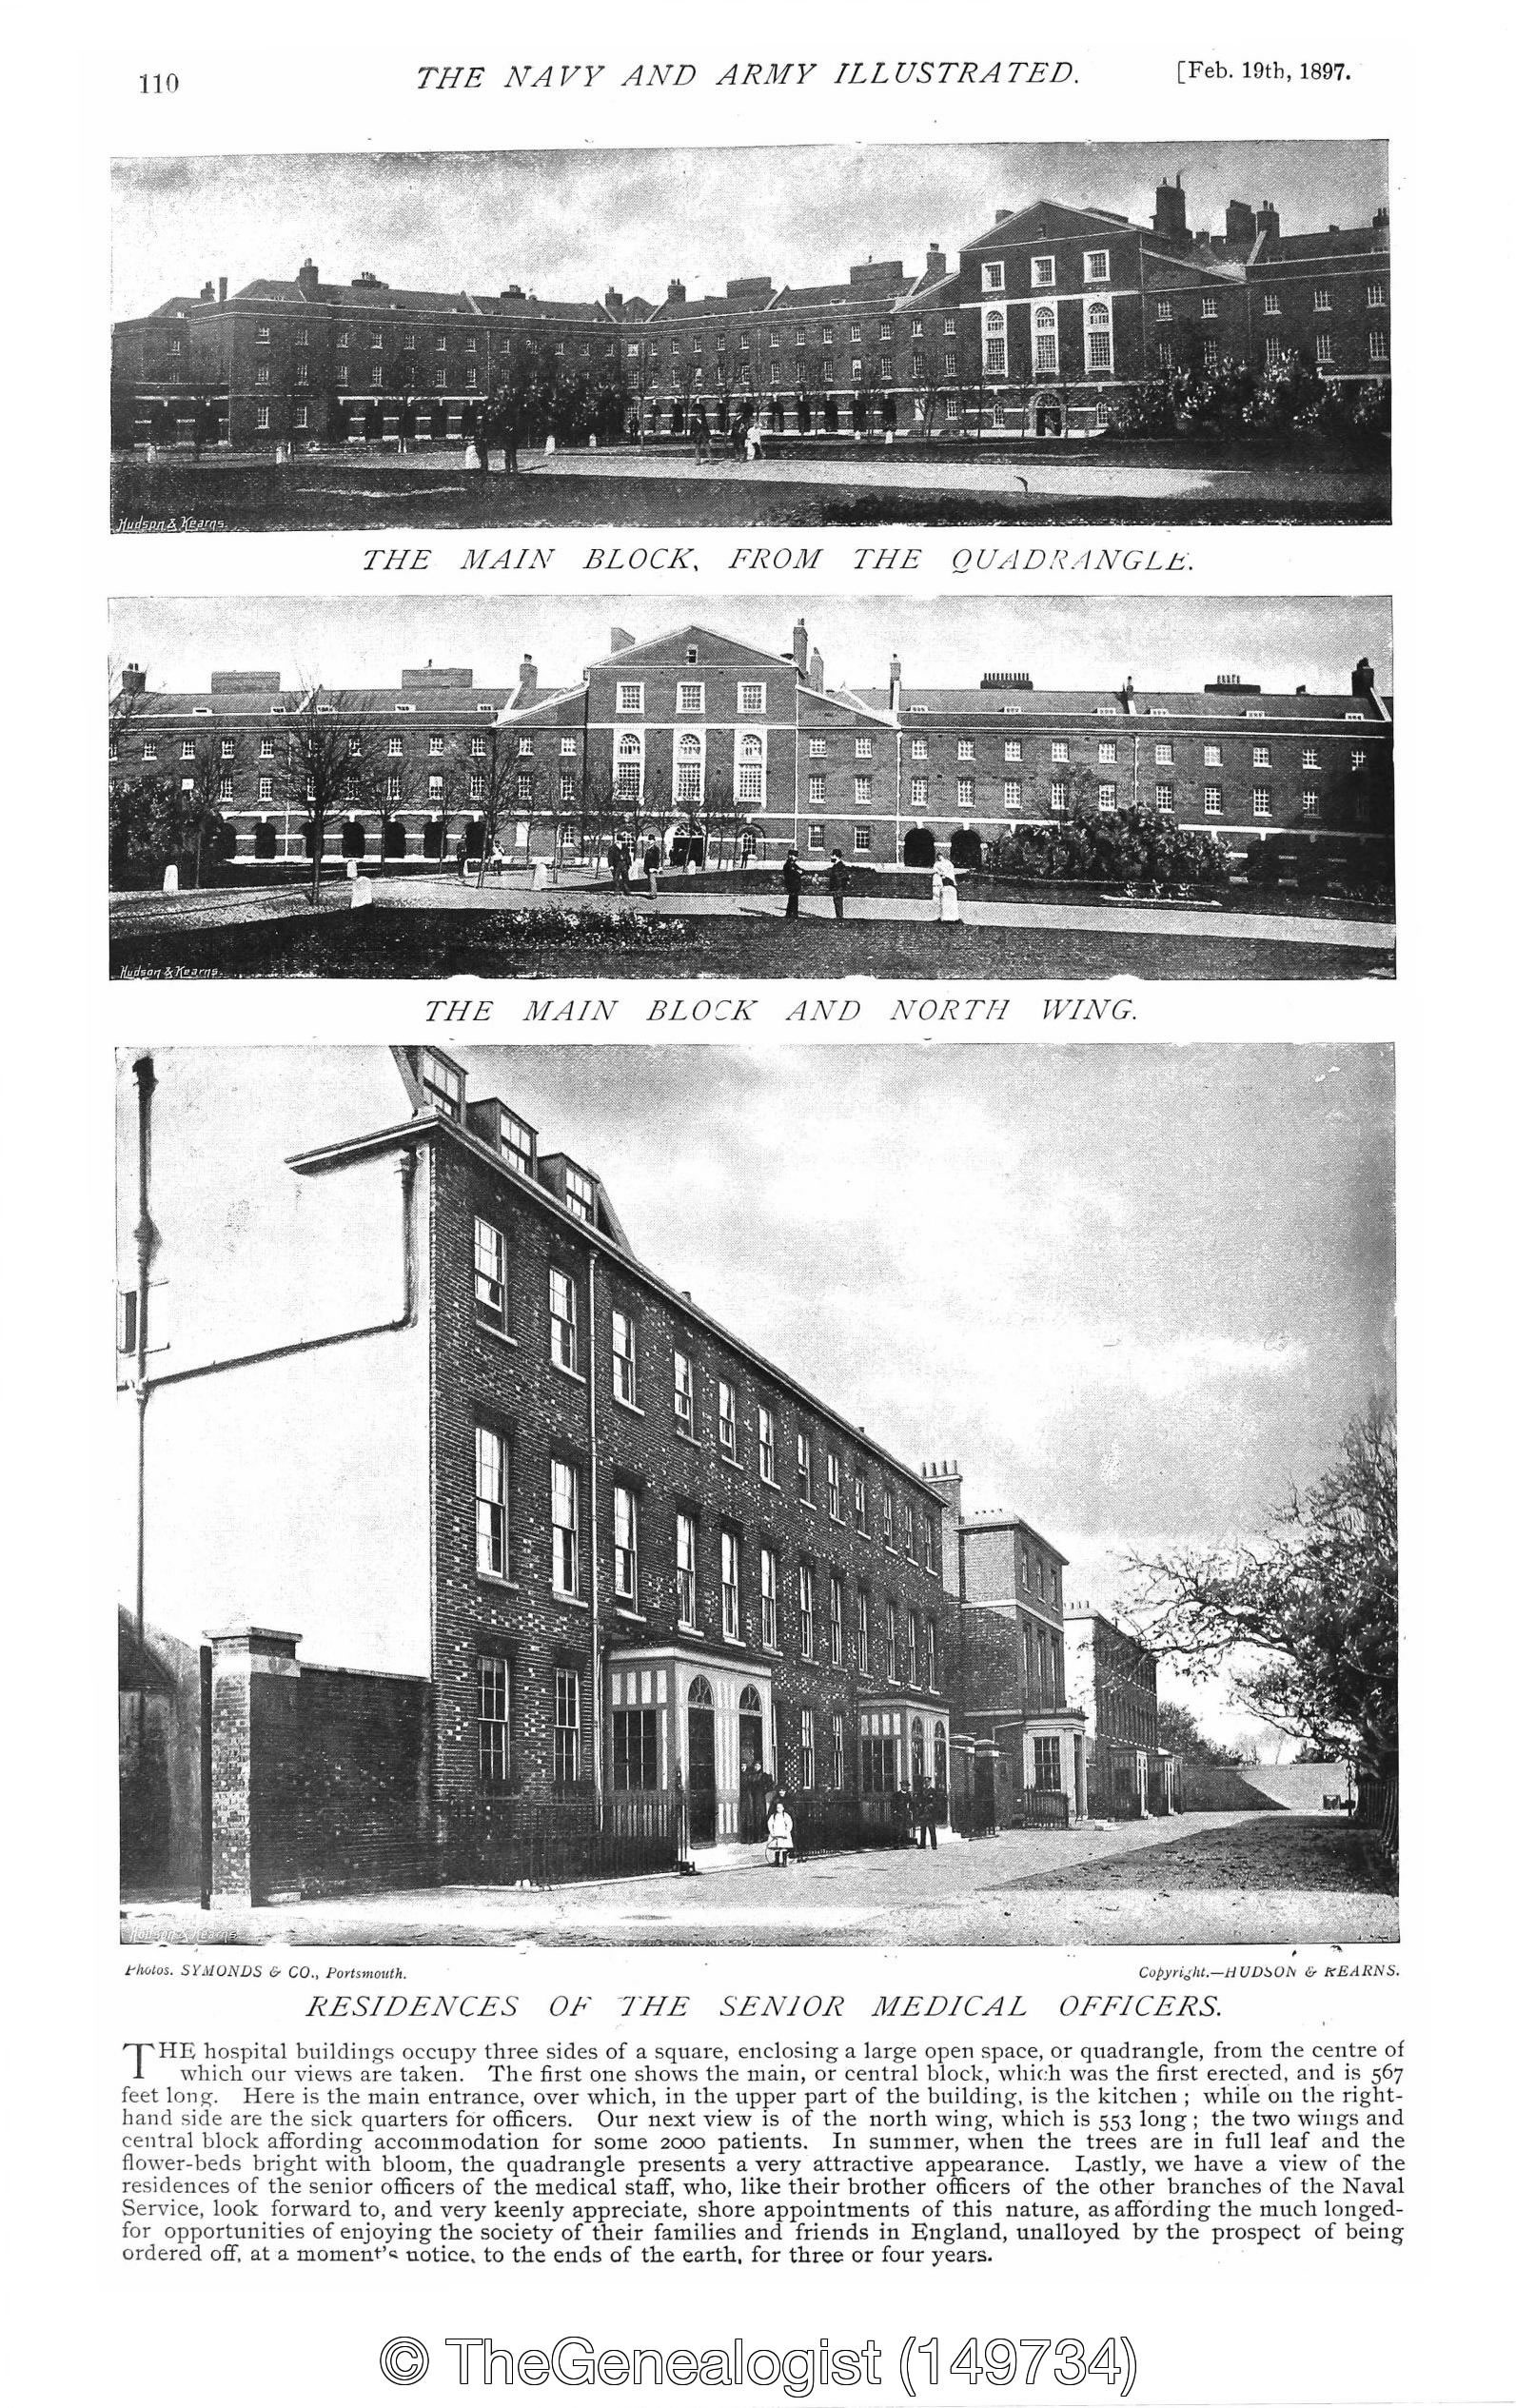 The Royal Hospital Haslar in Navy and Army Illustrated February 1918 from TheGenealogist's Newspapers & Magazines collection